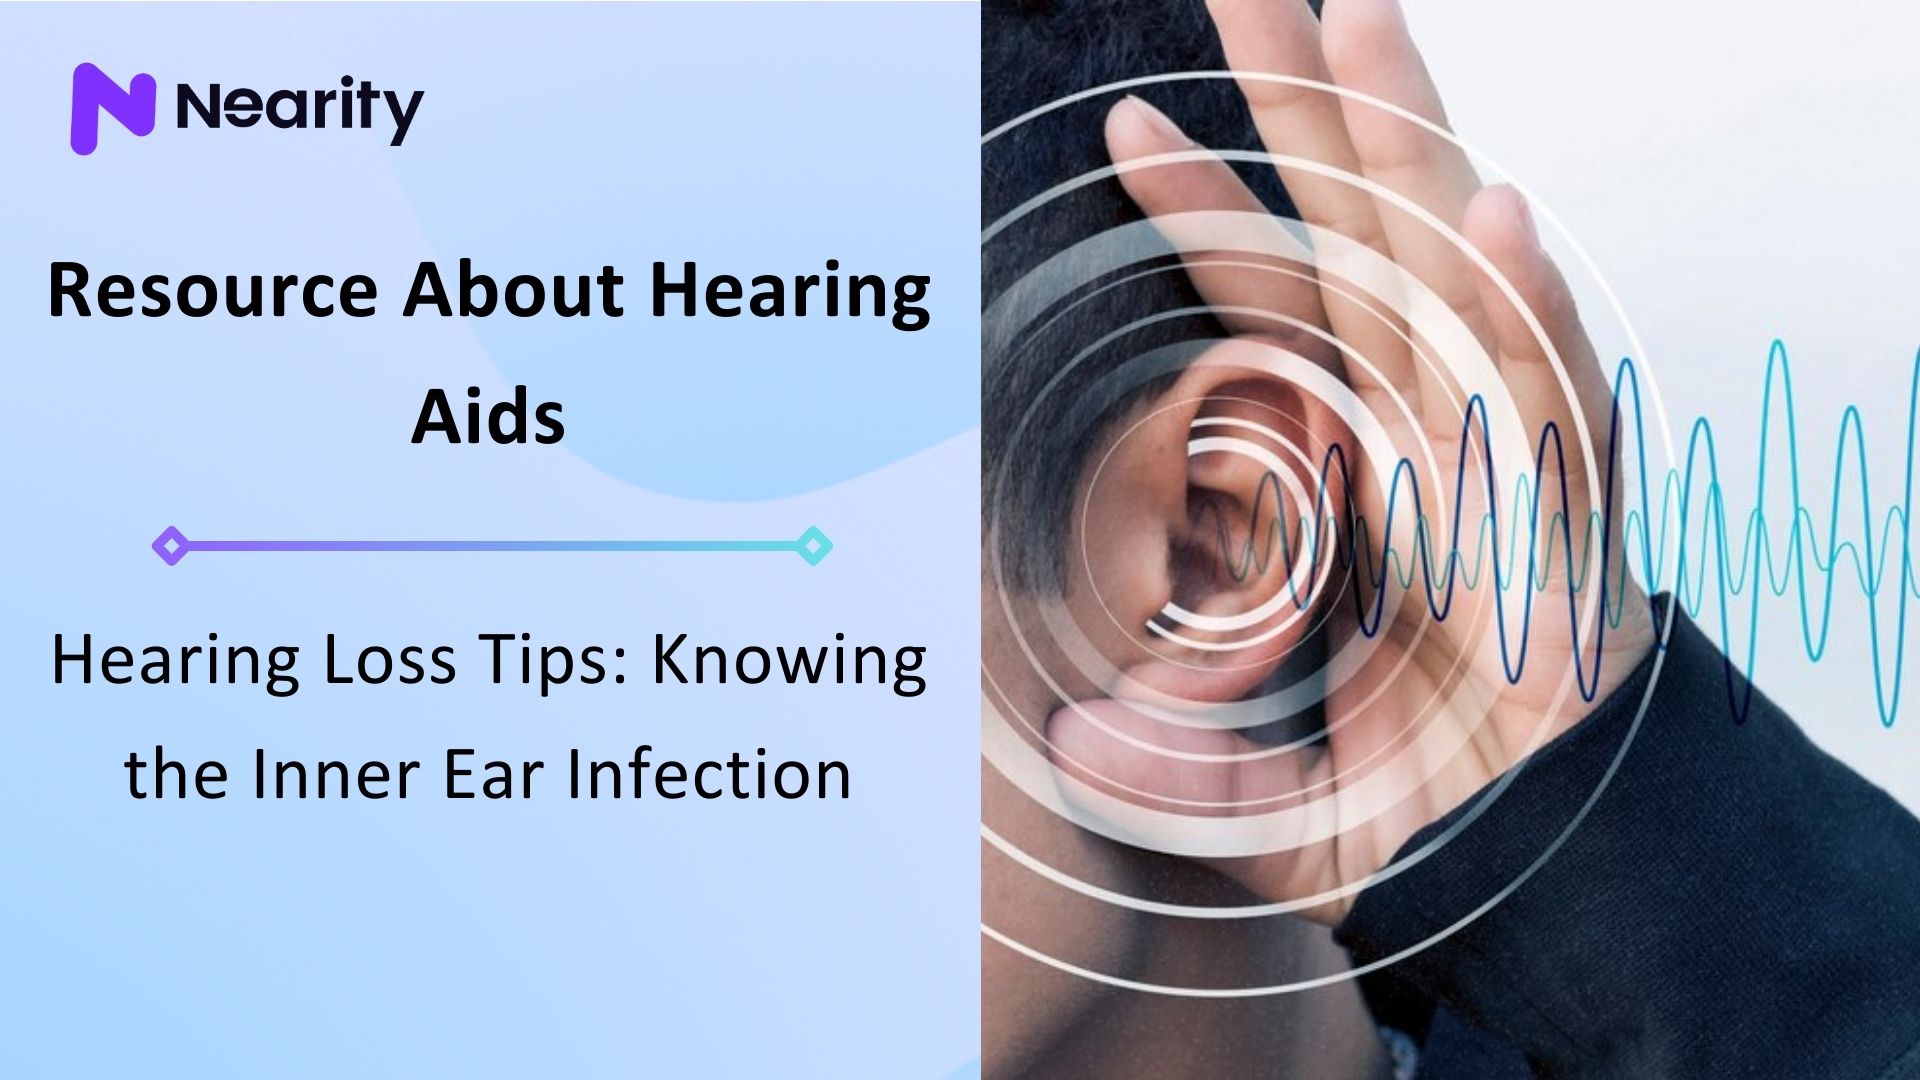 Hearing Loss Tips: Knowing the Inner Ear Infection